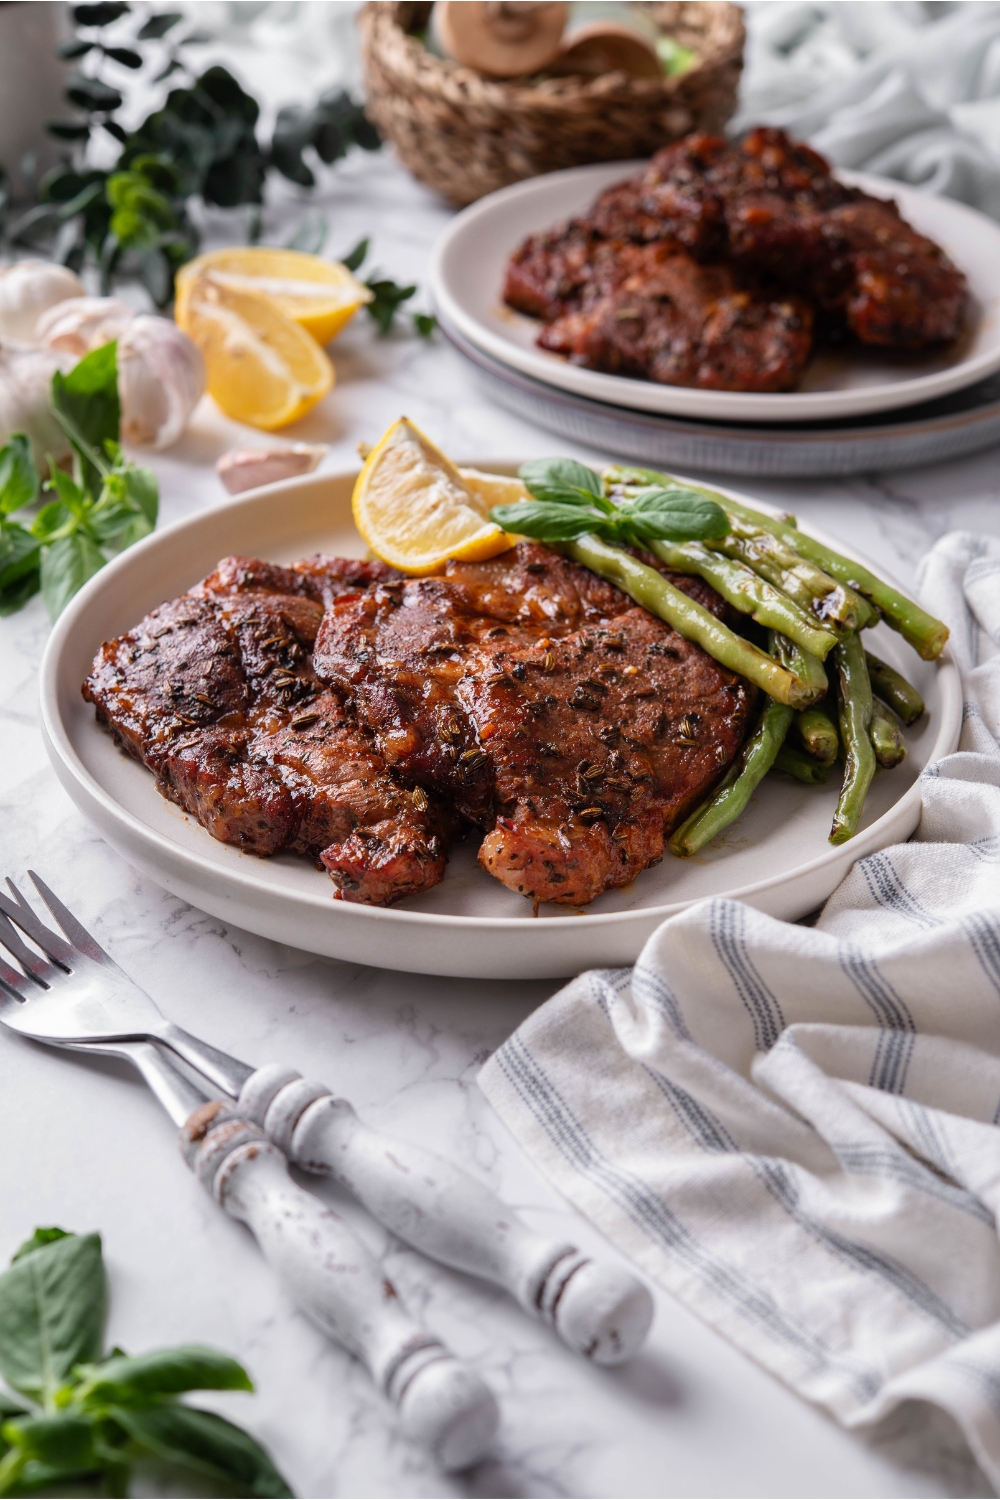 A plate of two seasoned pork steaks layered on top of each other with a side of green beans, a garnish, and two lemon wedges. Next to the plate are two forks and another plate of pork steaks.